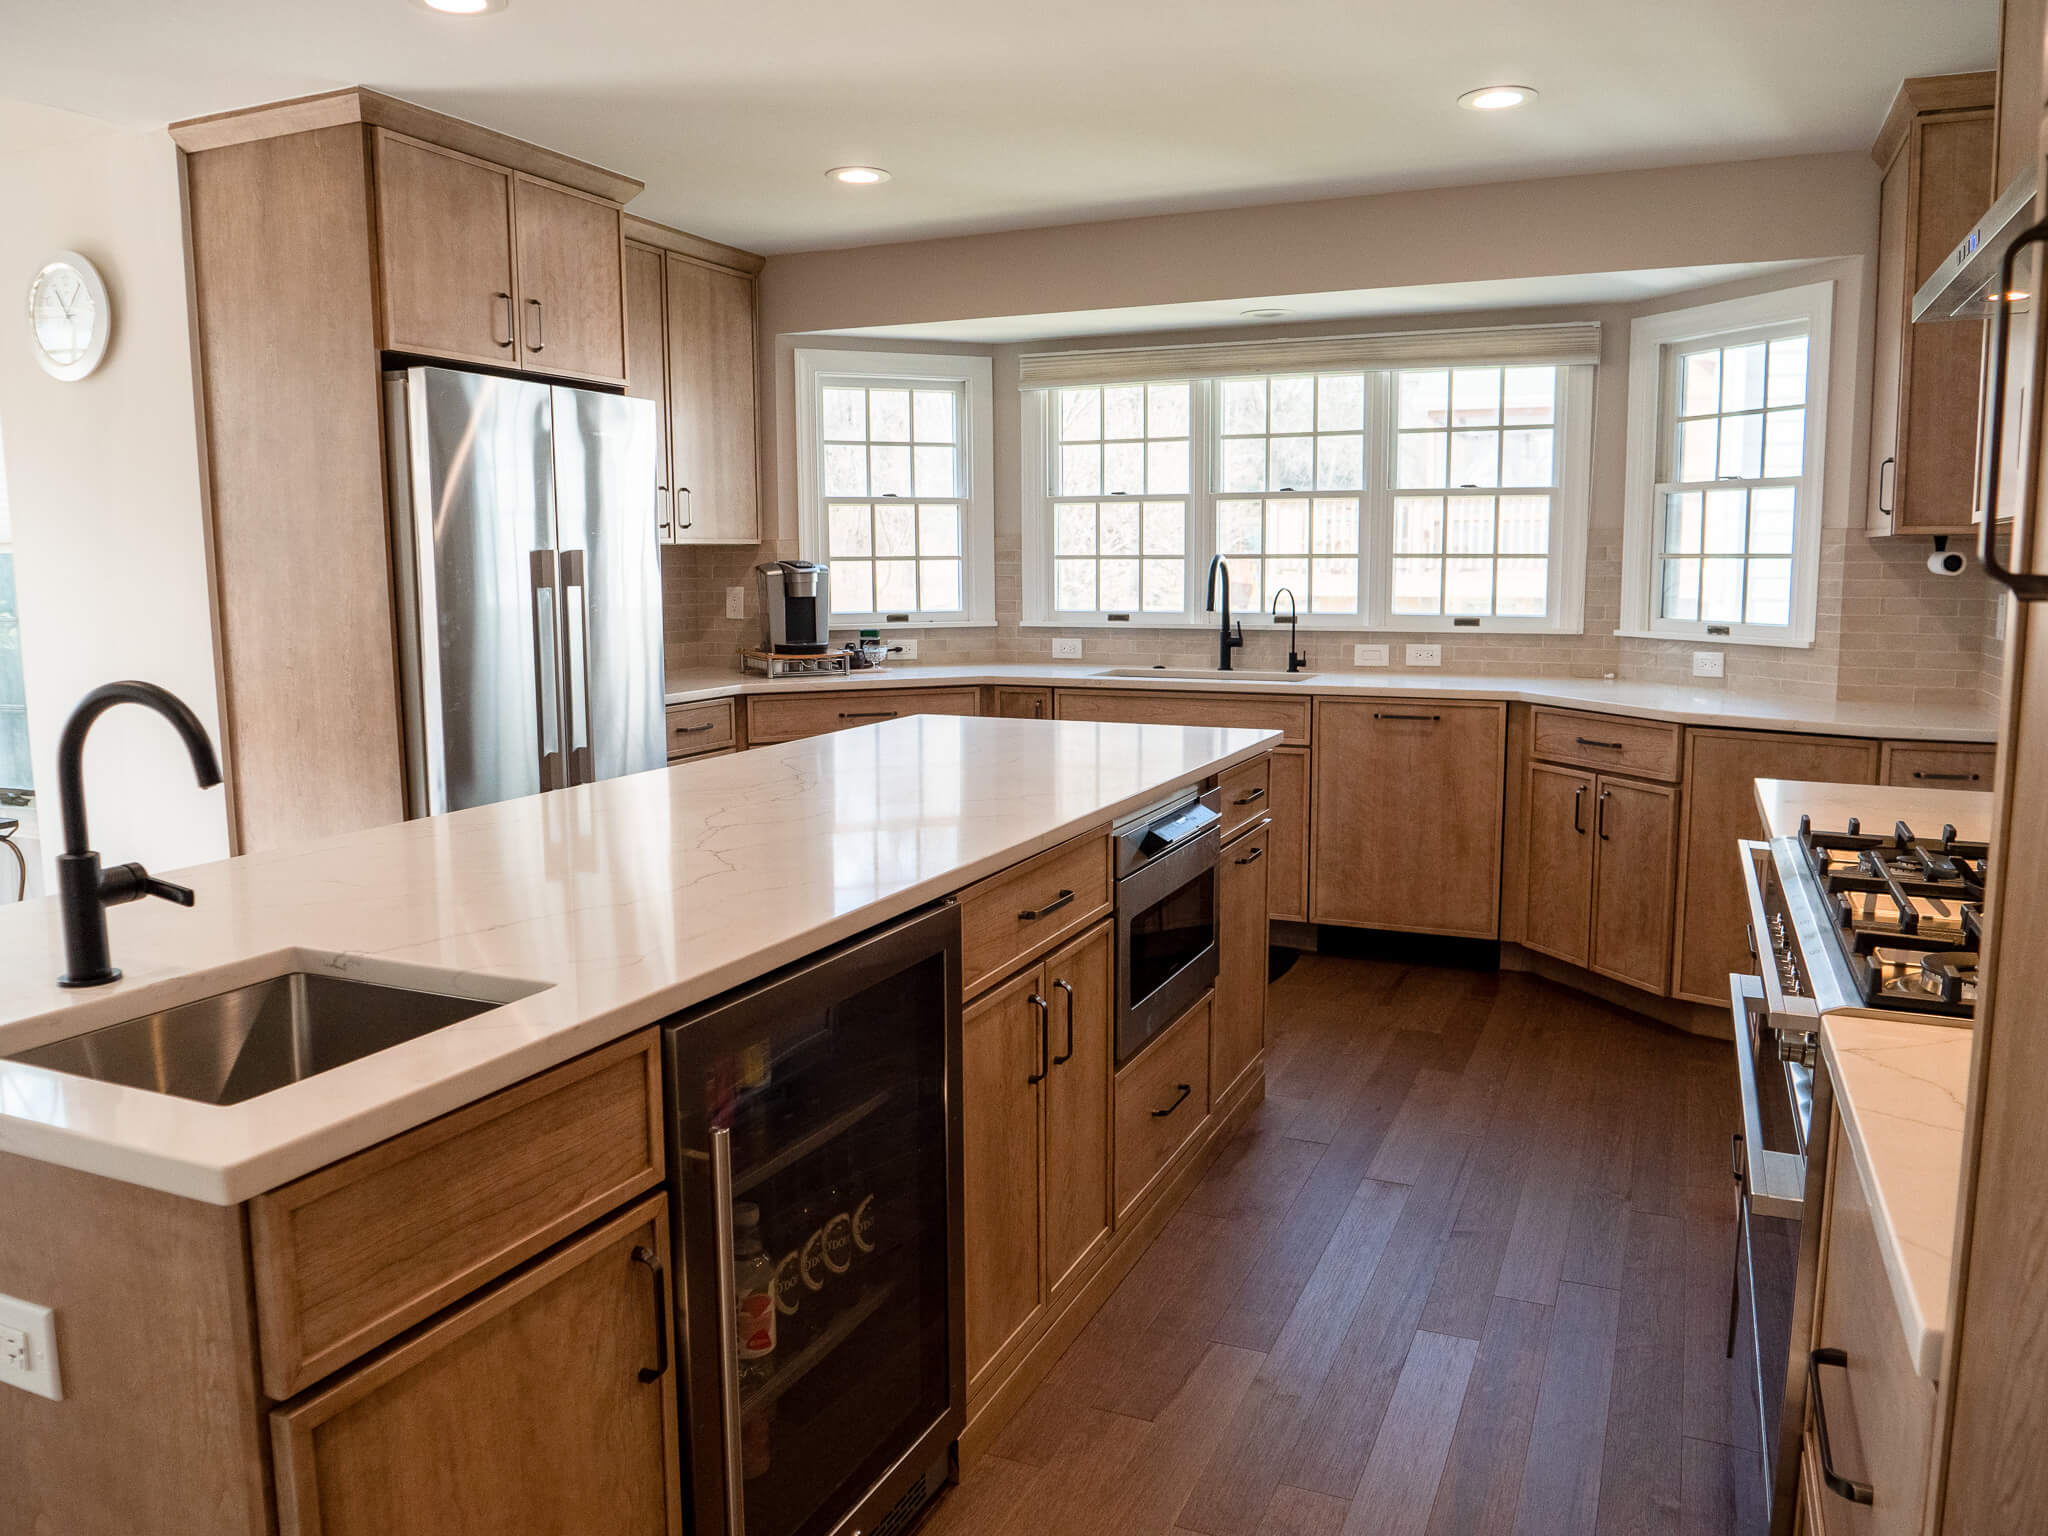 a classic look of a kitchen with wooden floor and cabinets